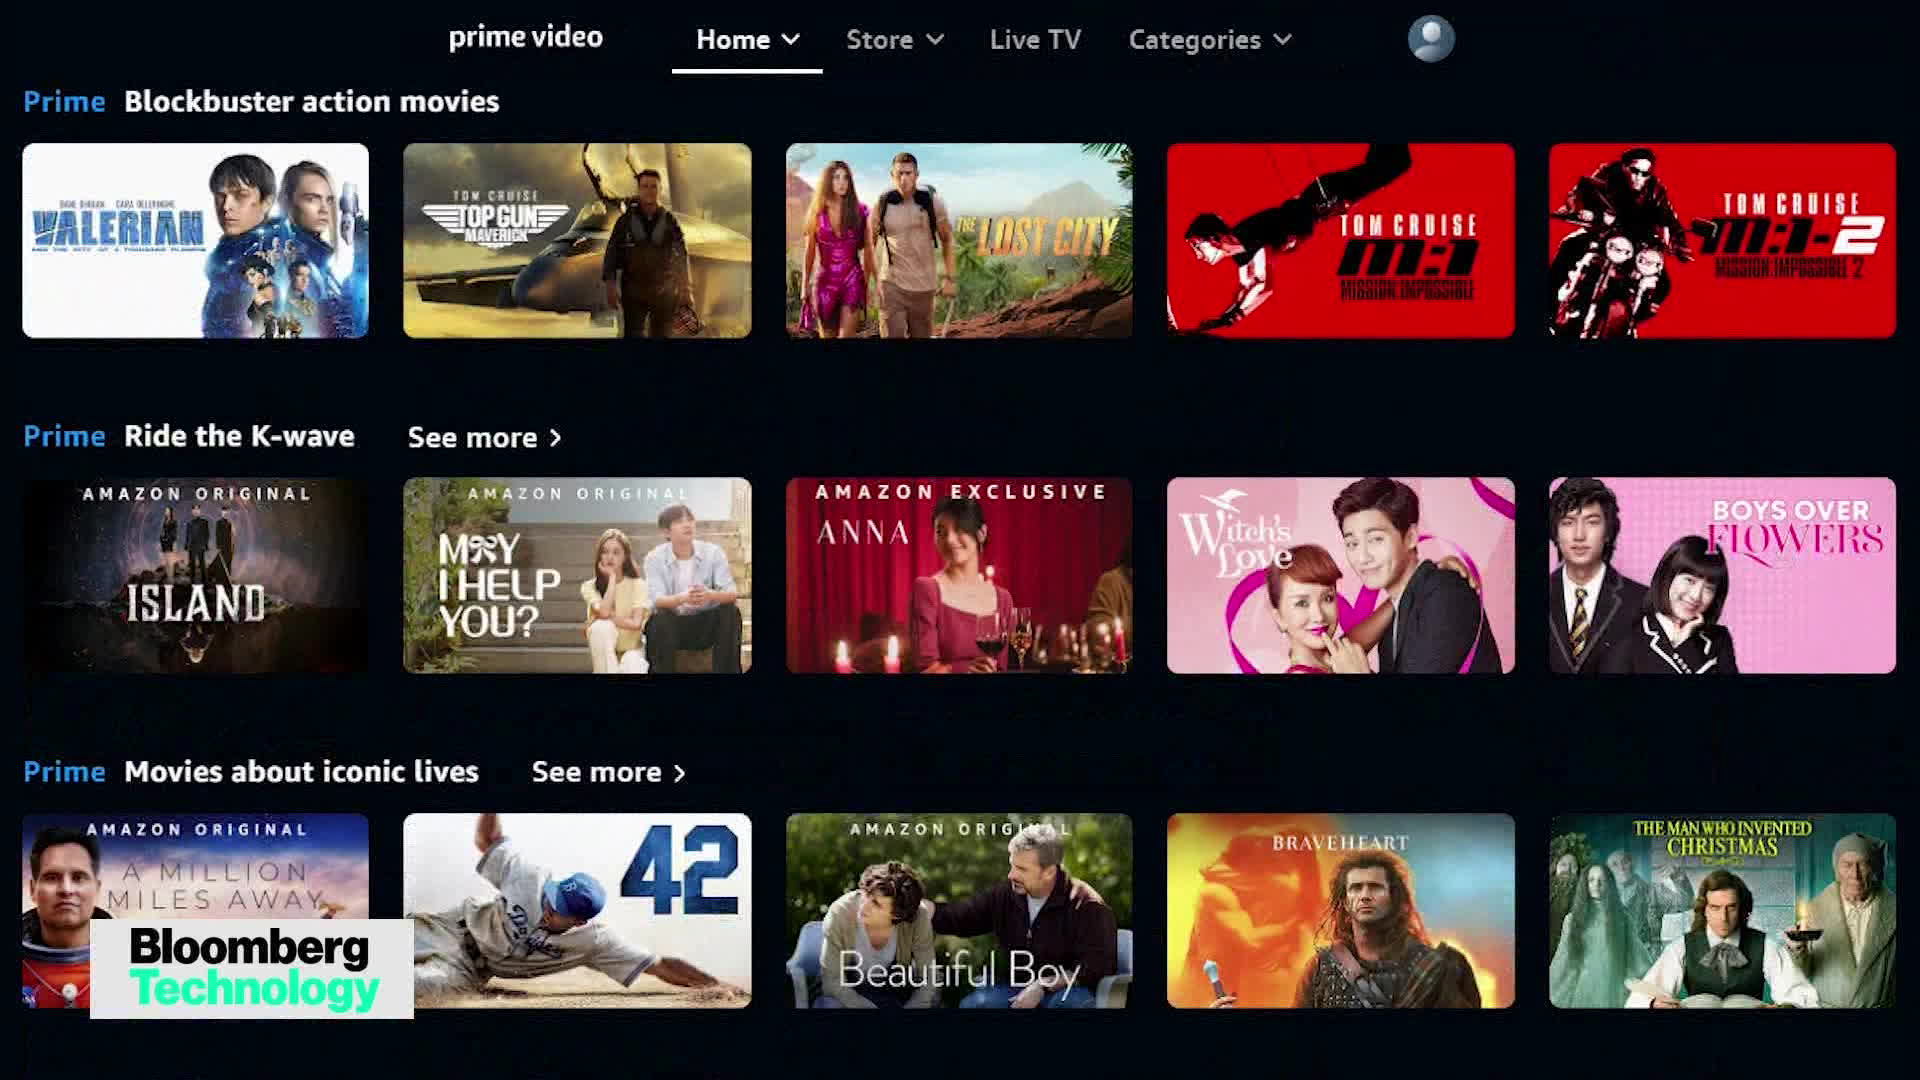 Prime Video Official Help Site -  Customer Service